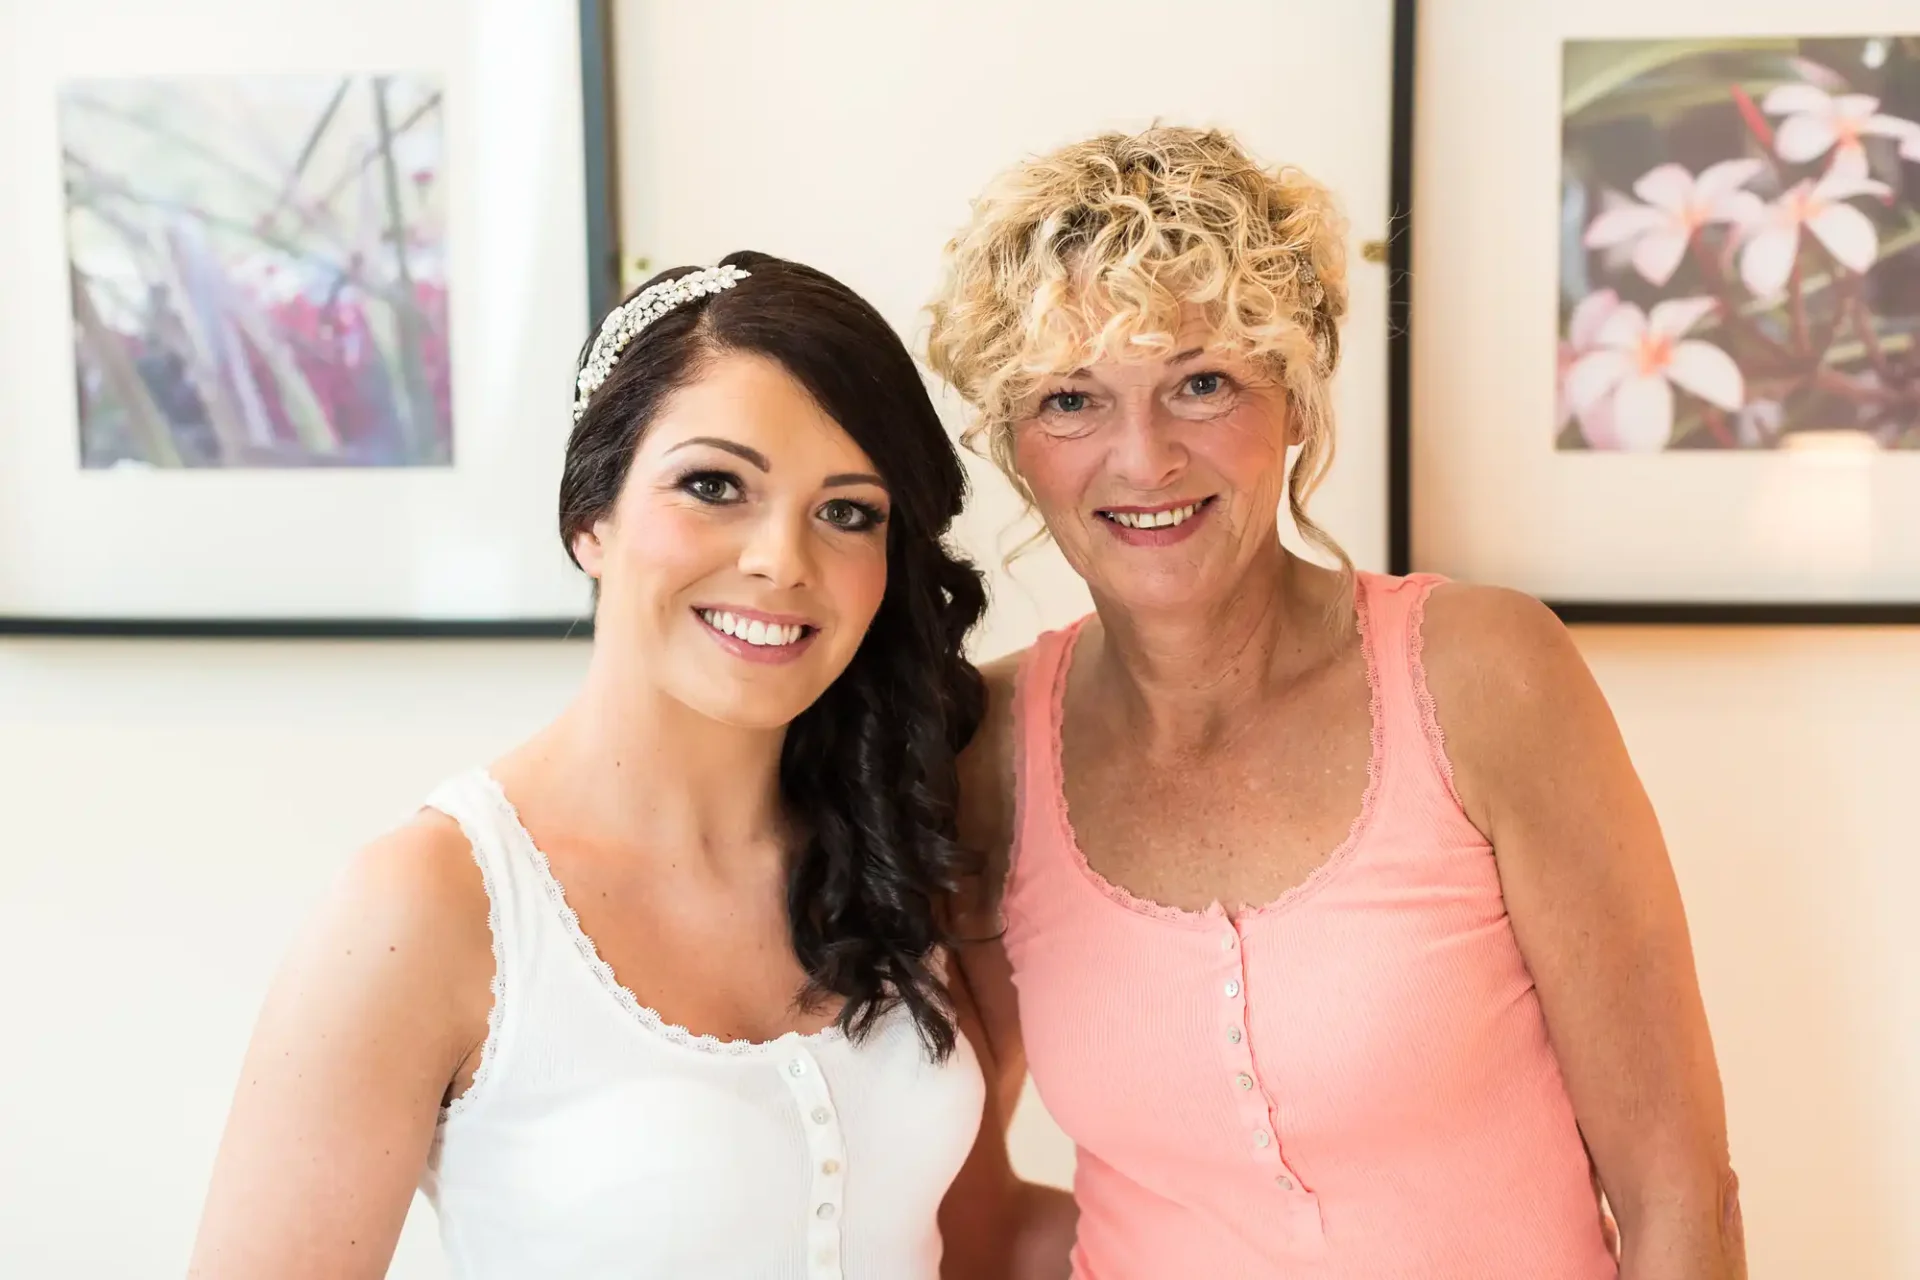 Two women, one younger with dark hair and a tiara, and an older with curly blonde hair, smiling together indoors near floral artwork.